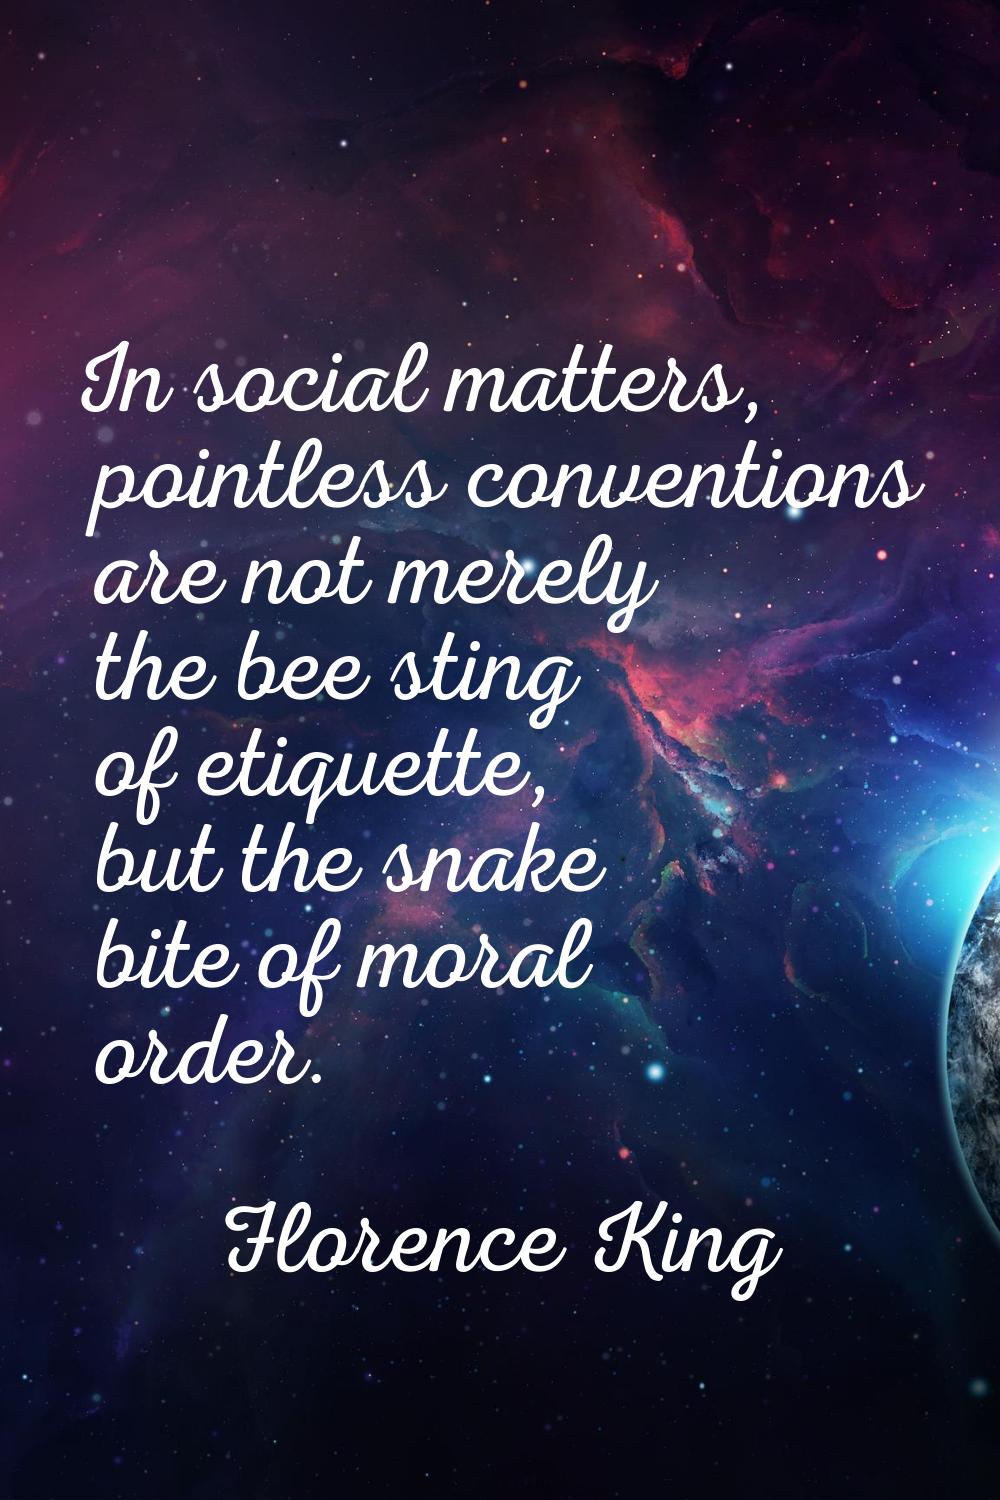 In social matters, pointless conventions are not merely the bee sting of etiquette, but the snake b